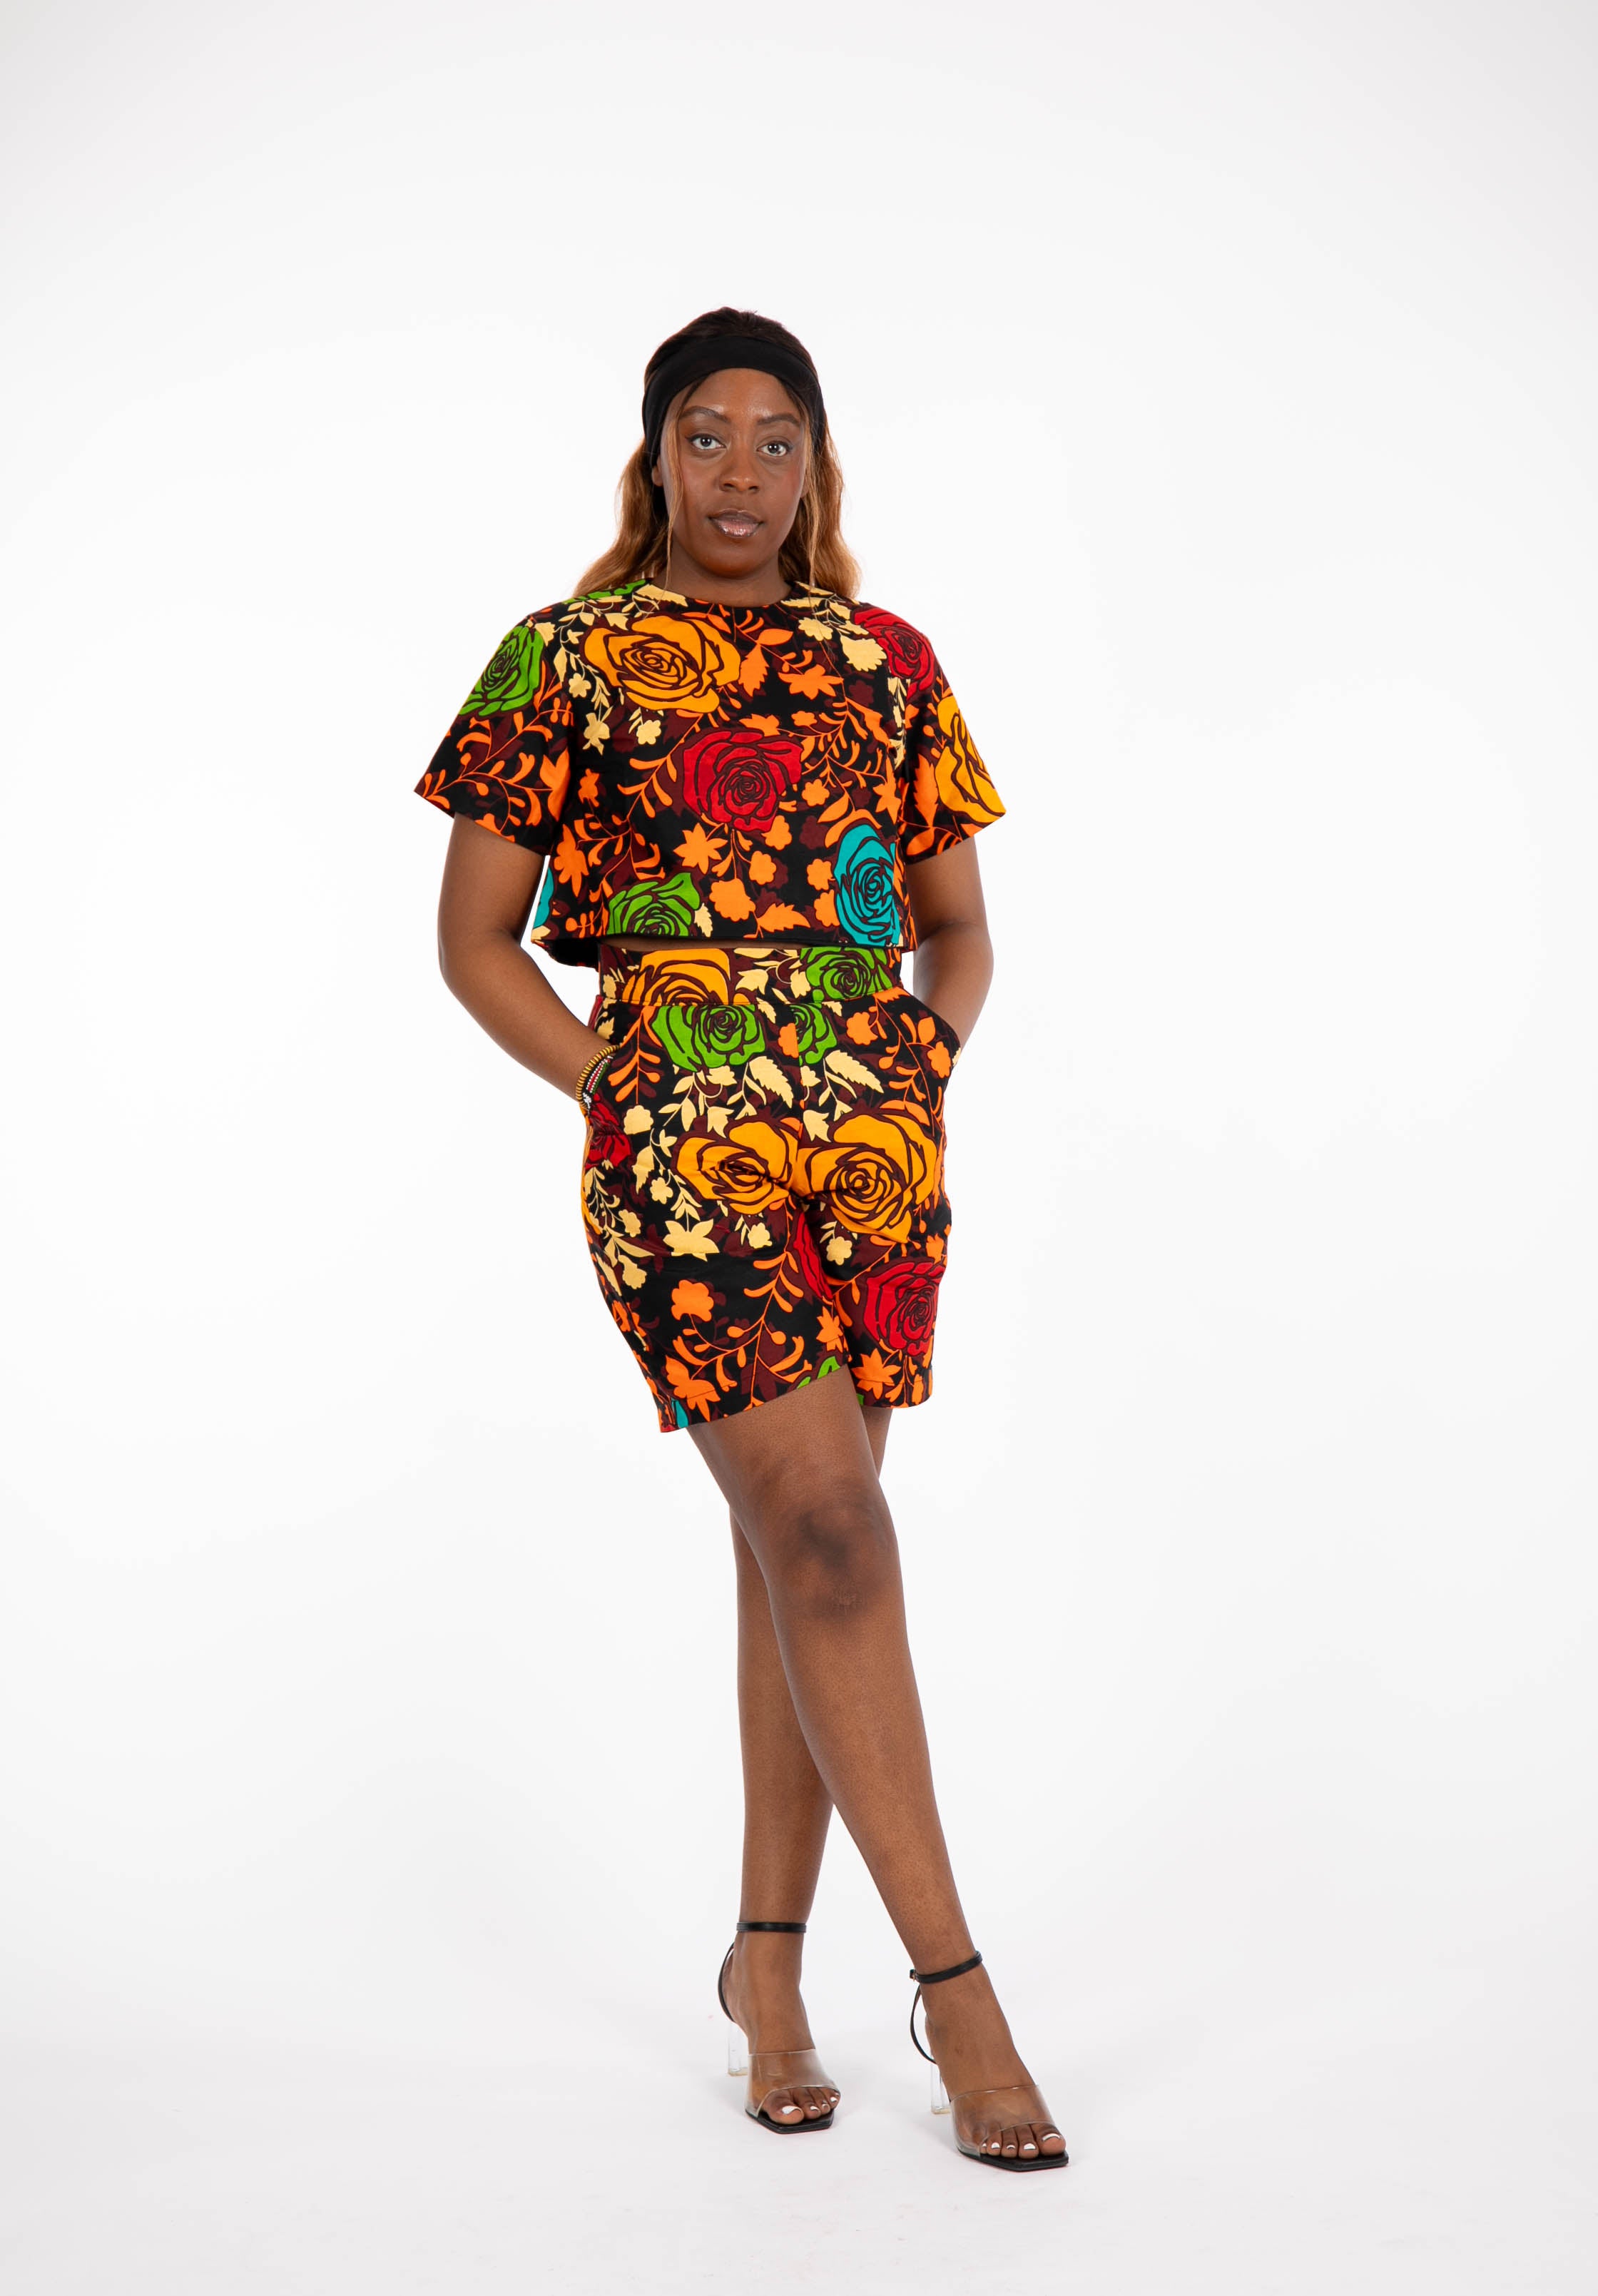 Temad collections Bombon  african print ankara shorts and top, Stylish African print bottoms and tops, African print Ankara fabric, African shorts, African shorts , African shorts , African print casual palazzo , African shorts for ladies, African flared trousers, Ankara shorts, Ankara top, Ankara crop top, latest Ankara shorts, african floral shorts and tops, stylish african shorts,  african crop top matching shorts